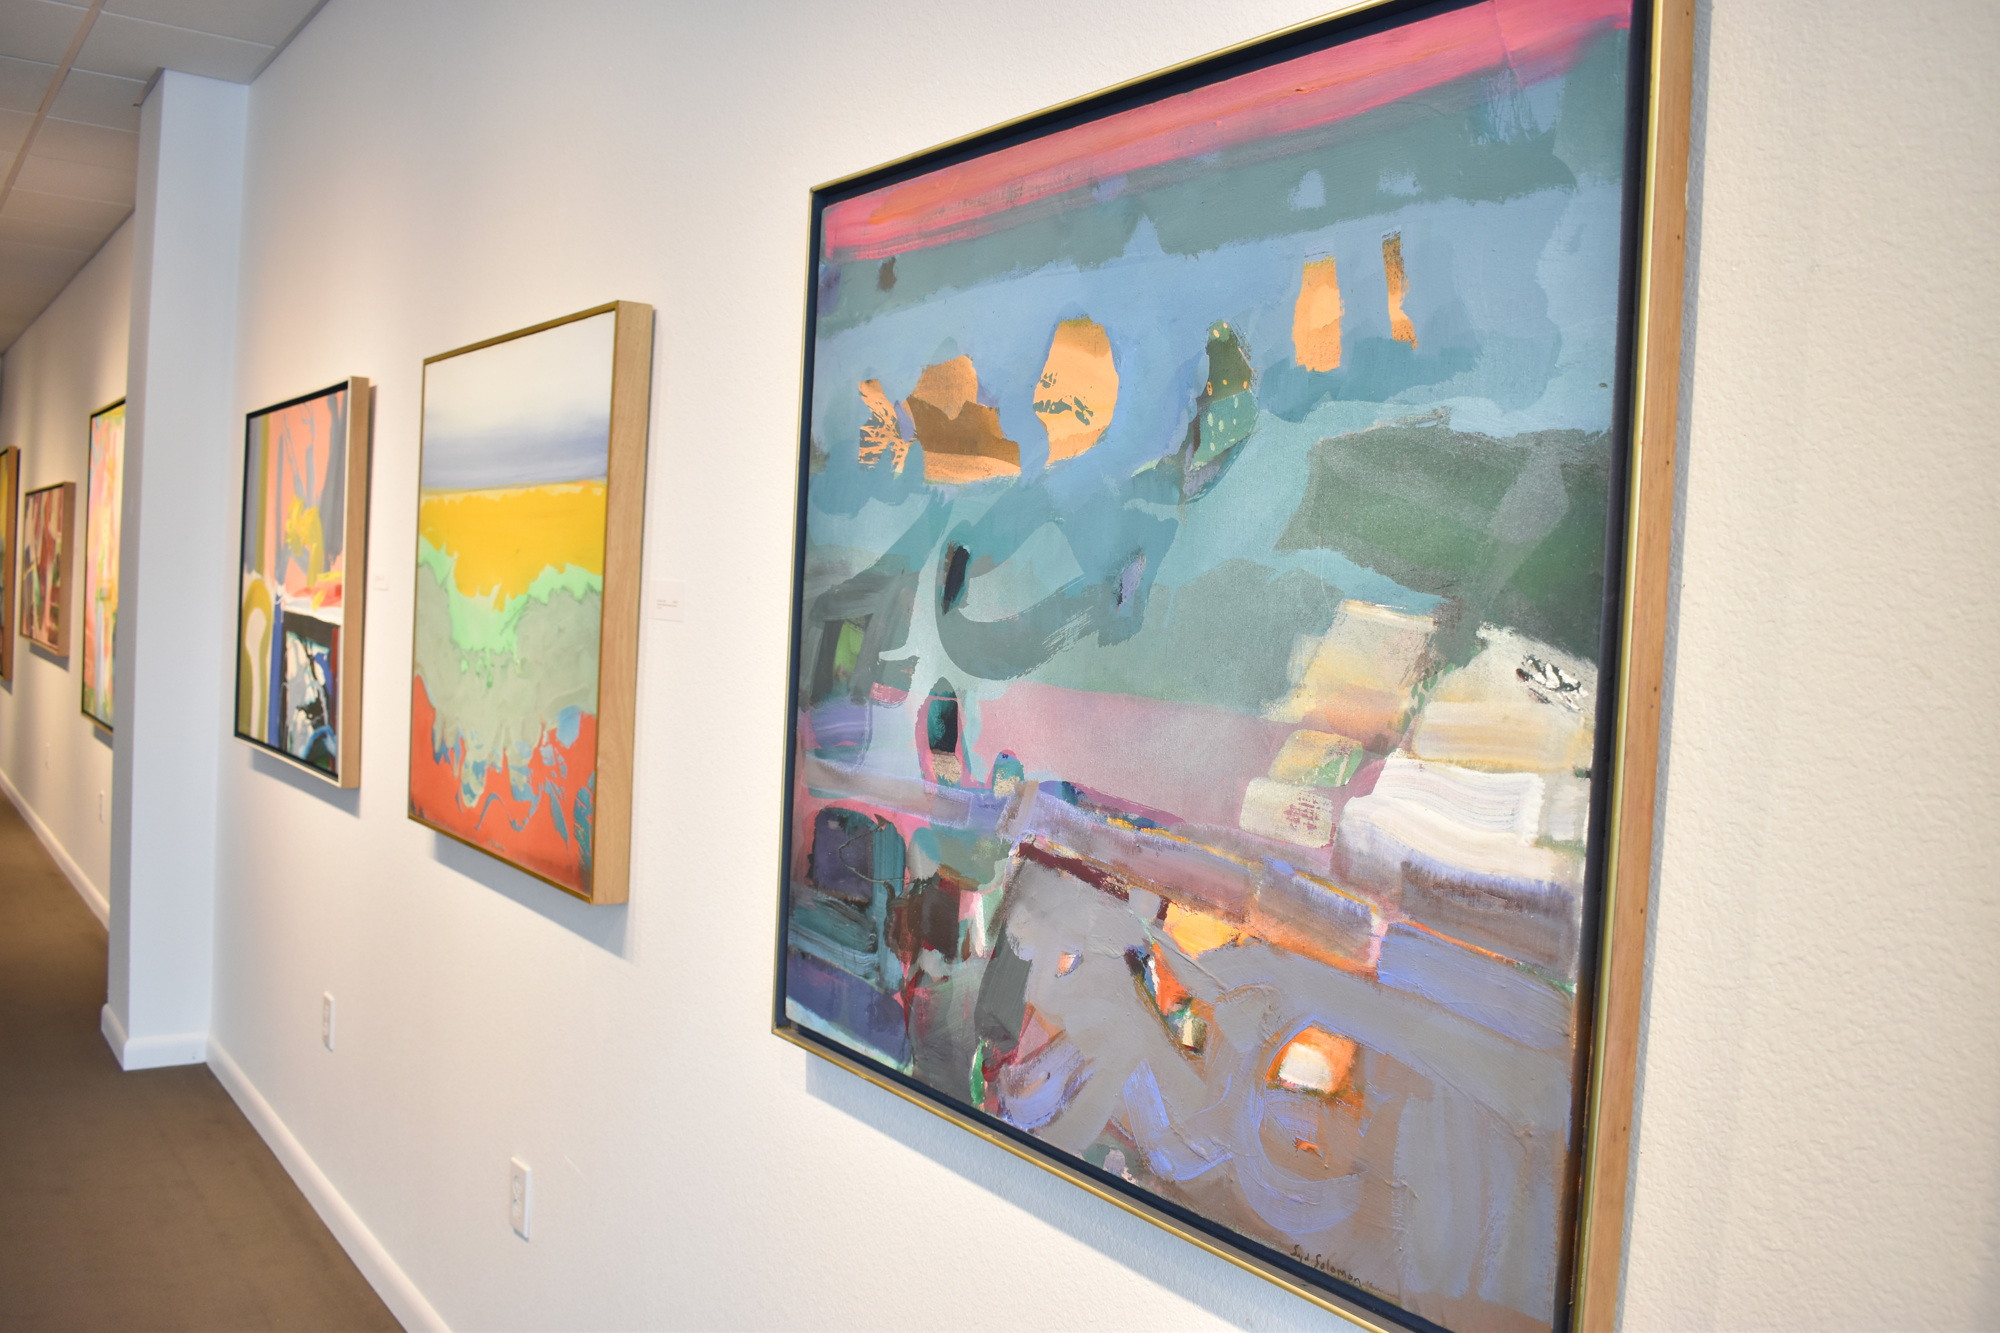 The works now on display at Allyn Gallup Contemporary Art show Solomon’s “love for live,” says gallery owner Sheila Moore. Photo by Niki Kottmann